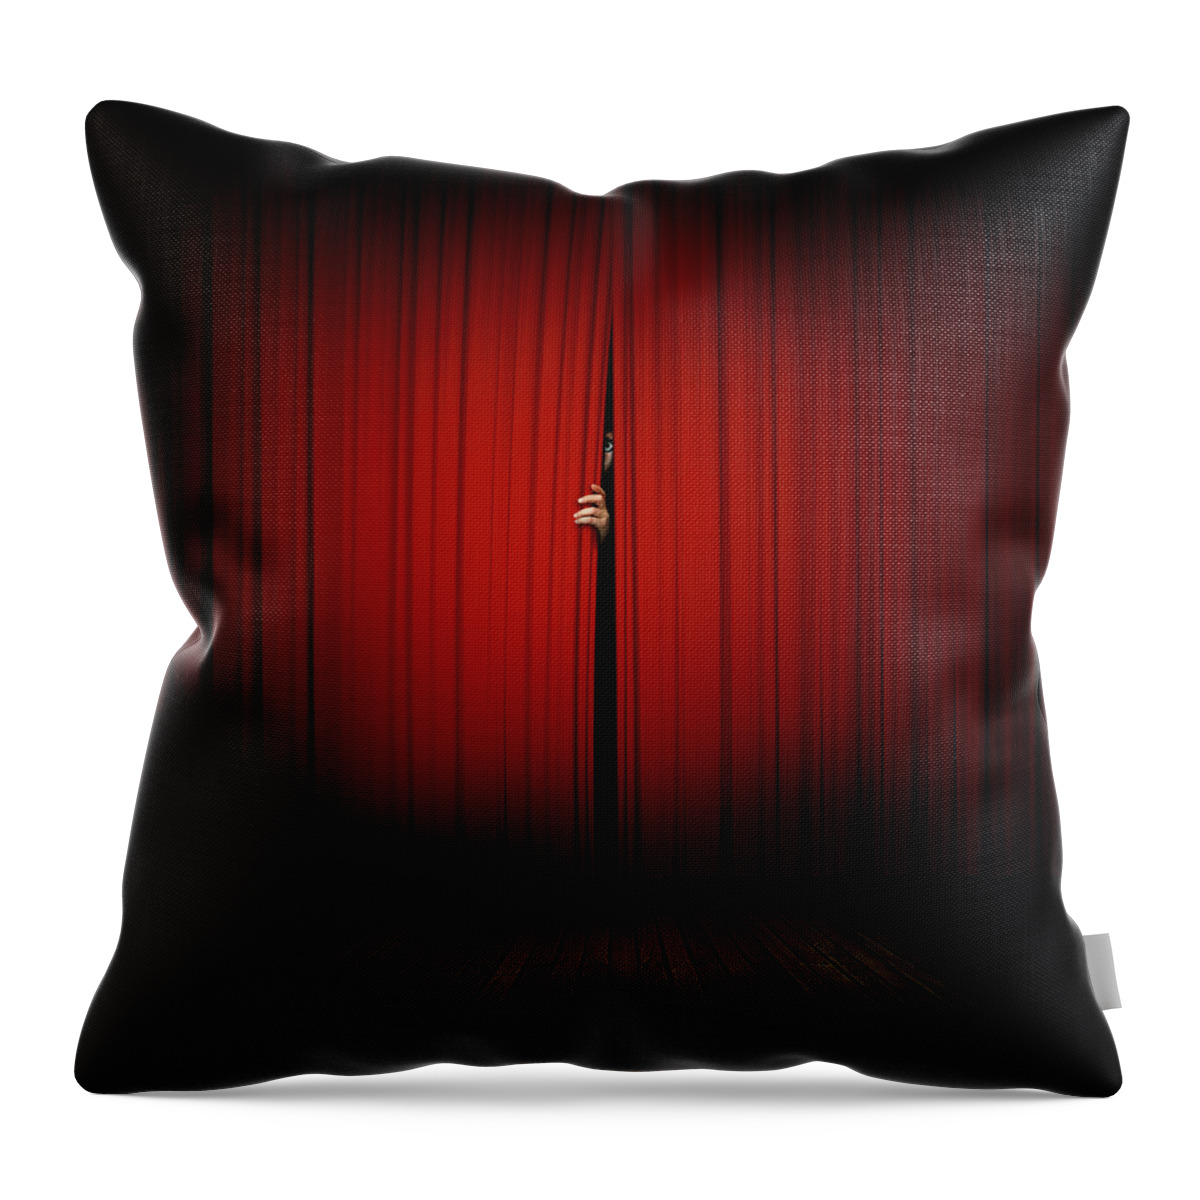 Brown Throw Pillow featuring the digital art Behind the Curtain by Zoltan Toth